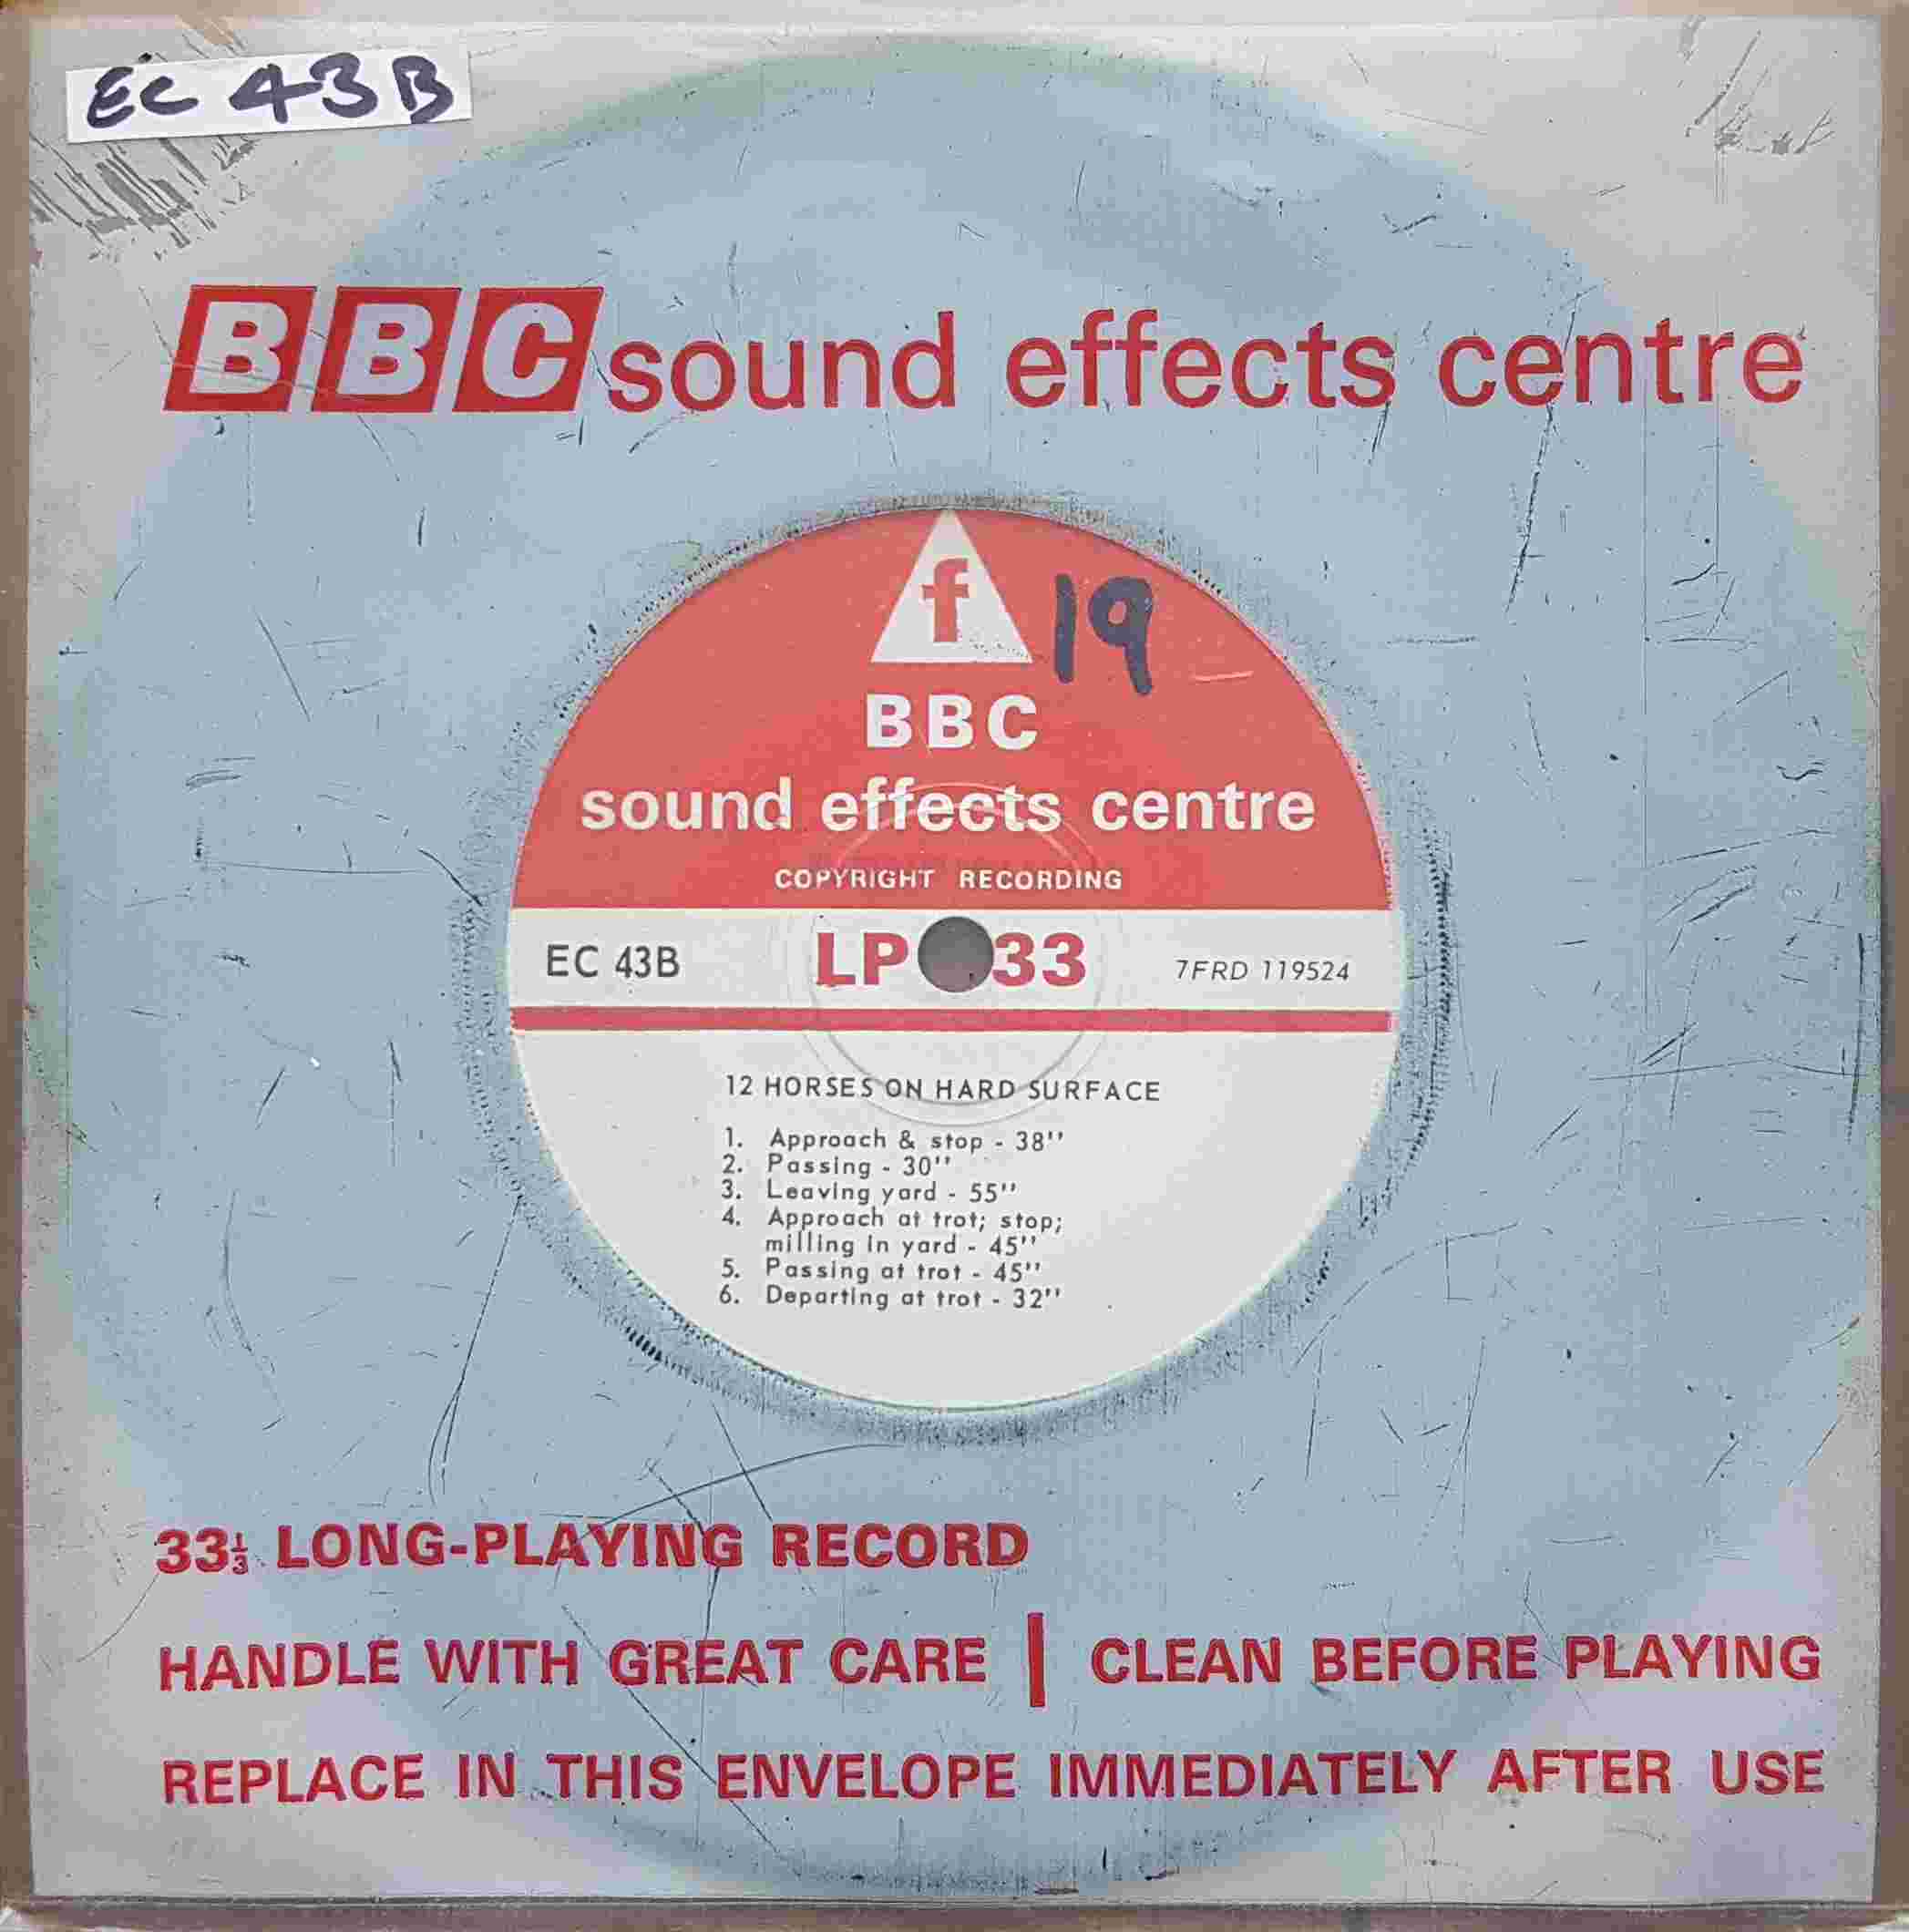 Picture of EC 43B 12 horses on hard surface by artist Not registered from the BBC singles - Records and Tapes library